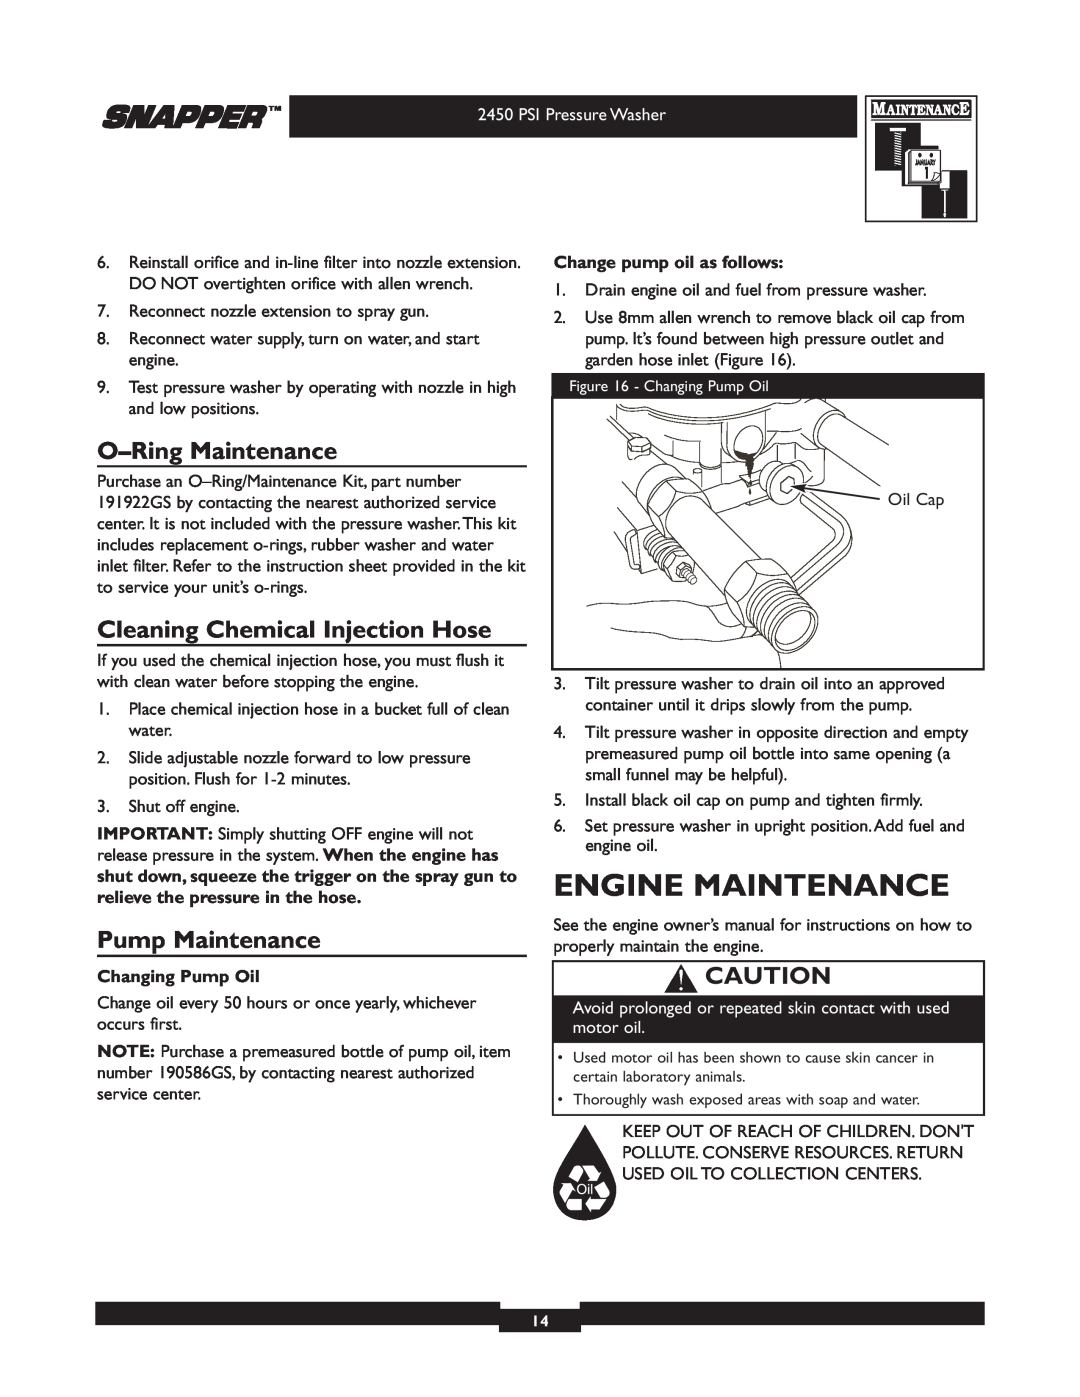 Snapper 020229 owner manual Engine Maintenance, O-Ring Maintenance, Cleaning Chemical Injection Hose, Pump Maintenance 